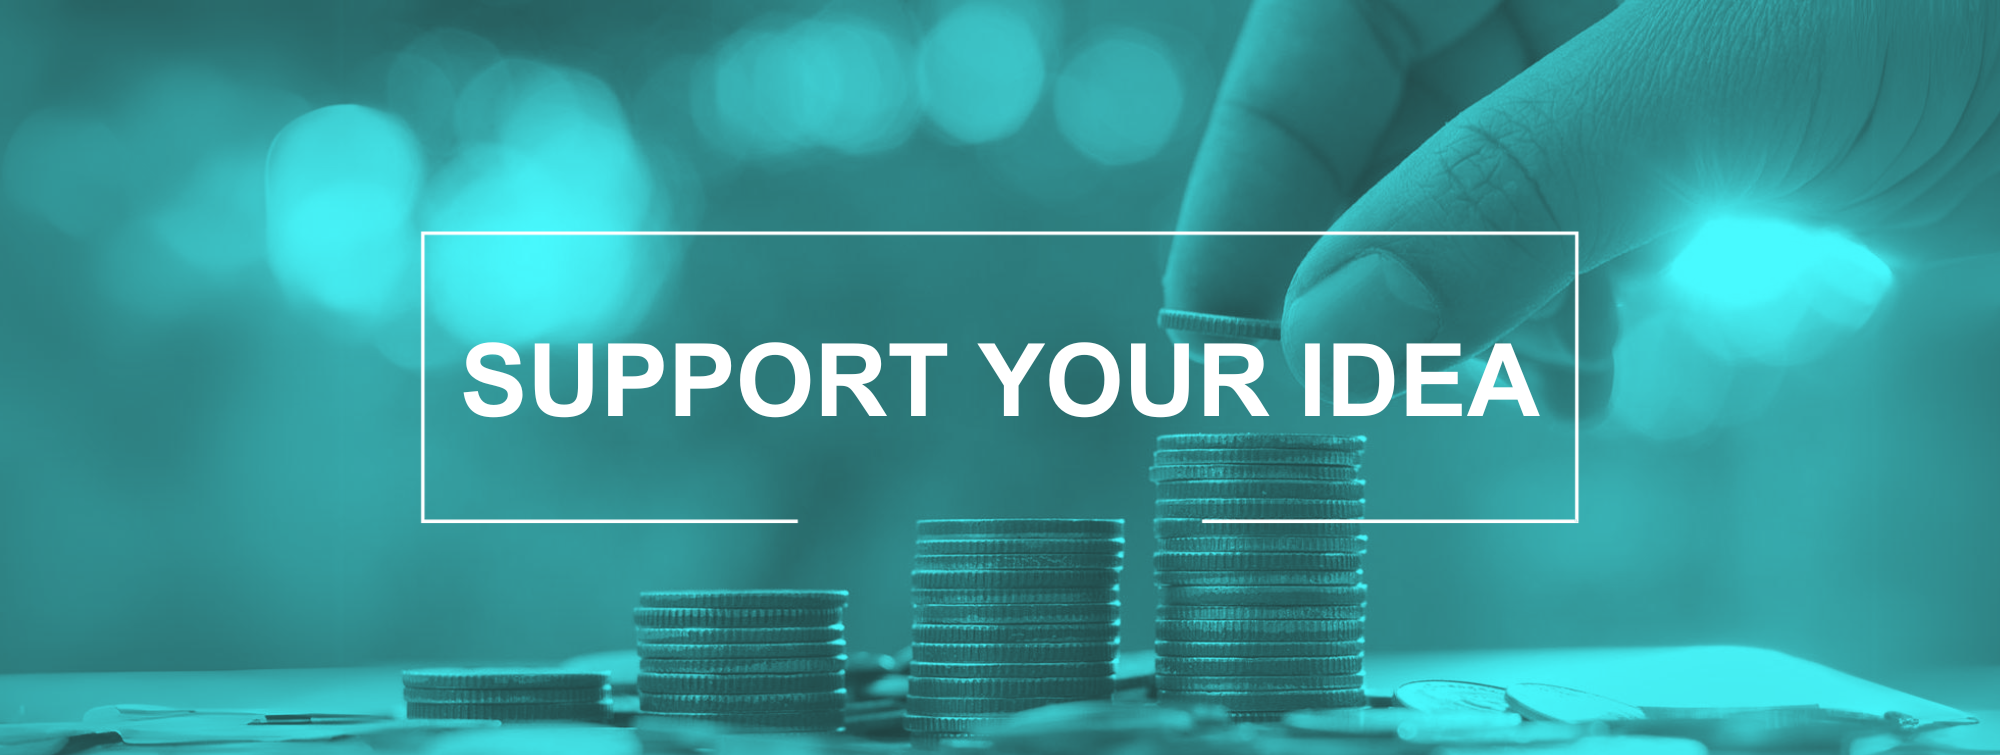 Support your idea